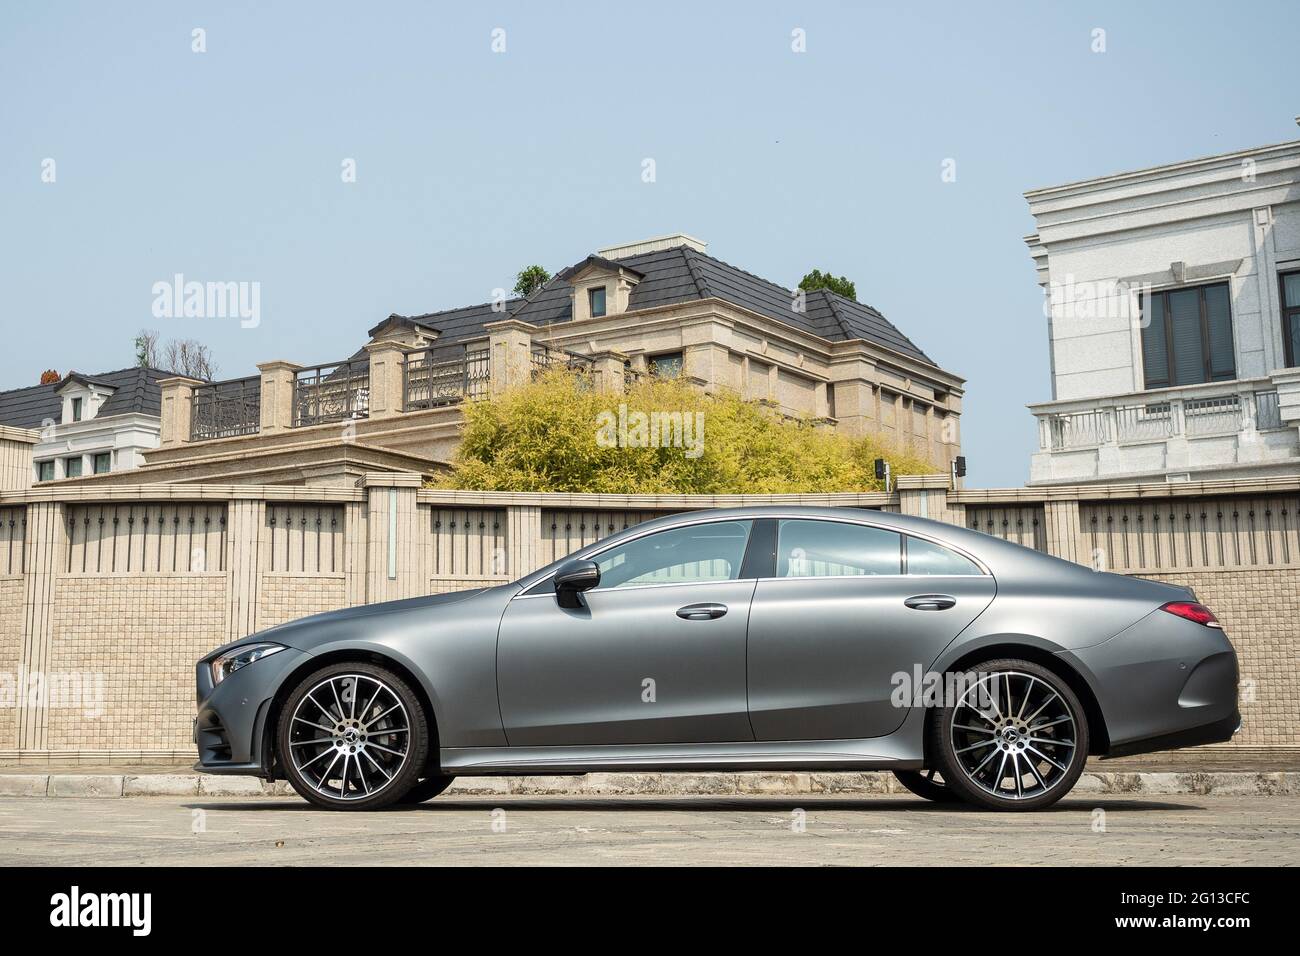 Hong Kong, China March 16, 2021 : Mercedes-Benz CLS 450 4MATIC Test Drive  Day March 16 2021 in Hong Kong Stock Photo - Alamy